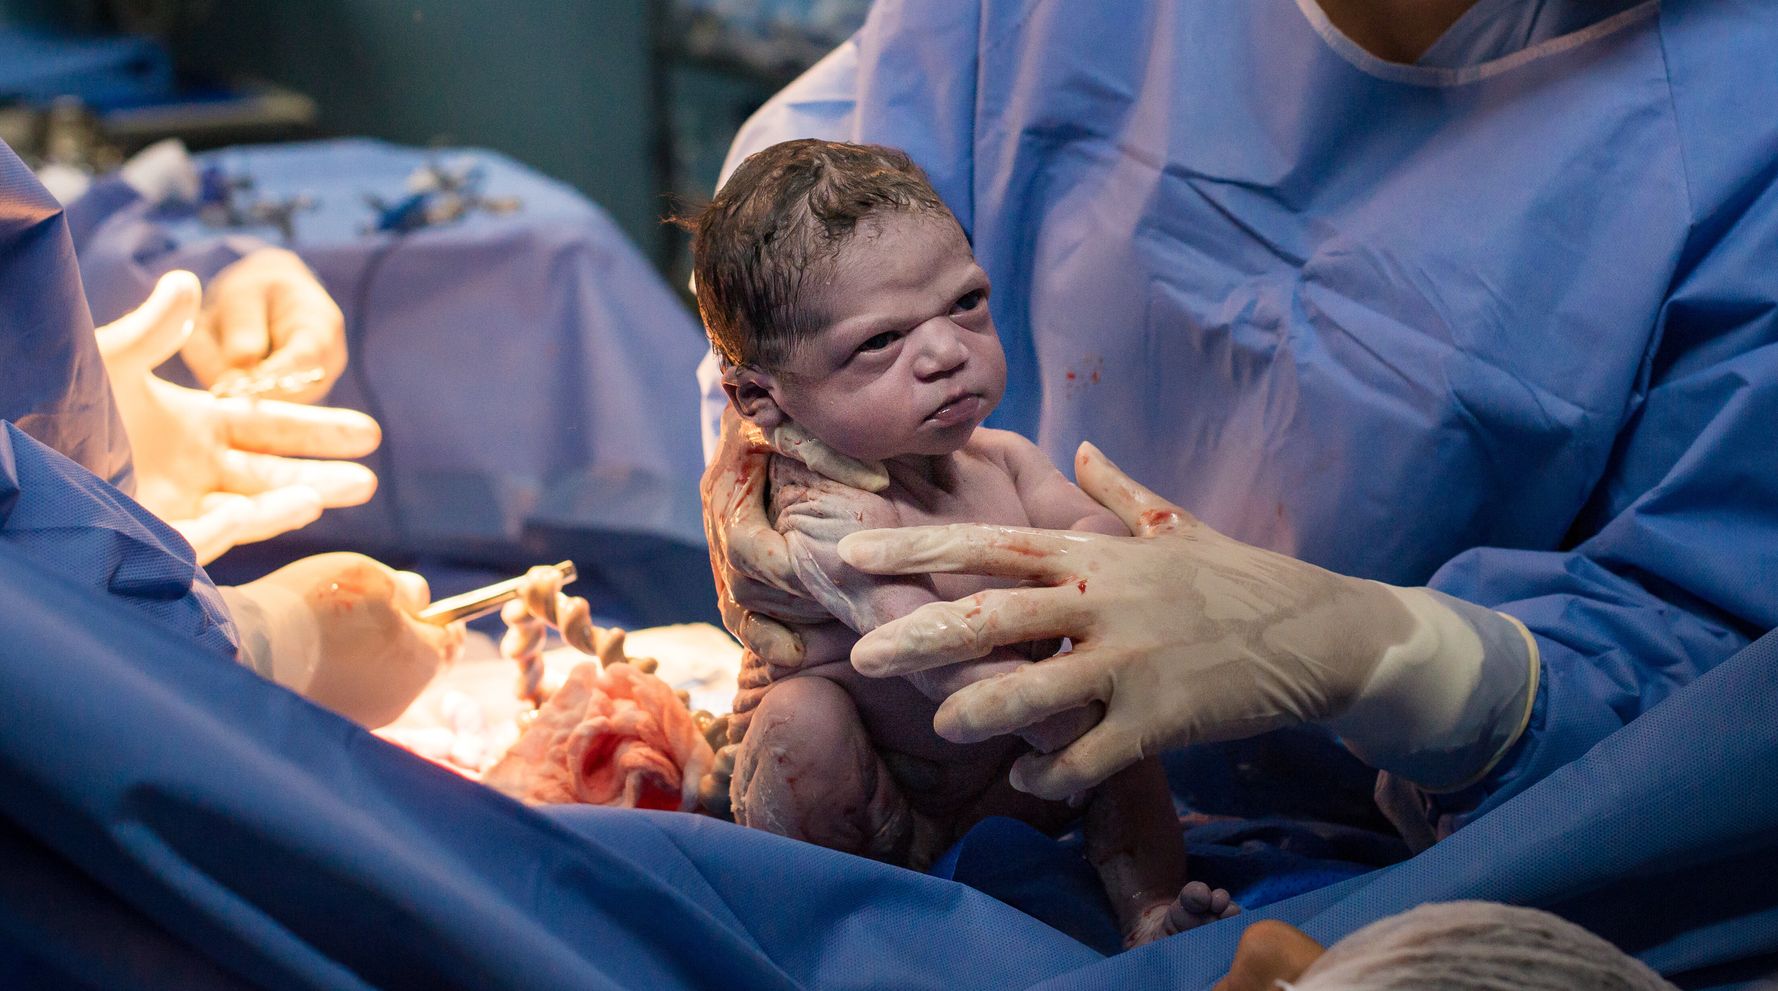 Newborn Baby Makes Epic Face In Birth Photo